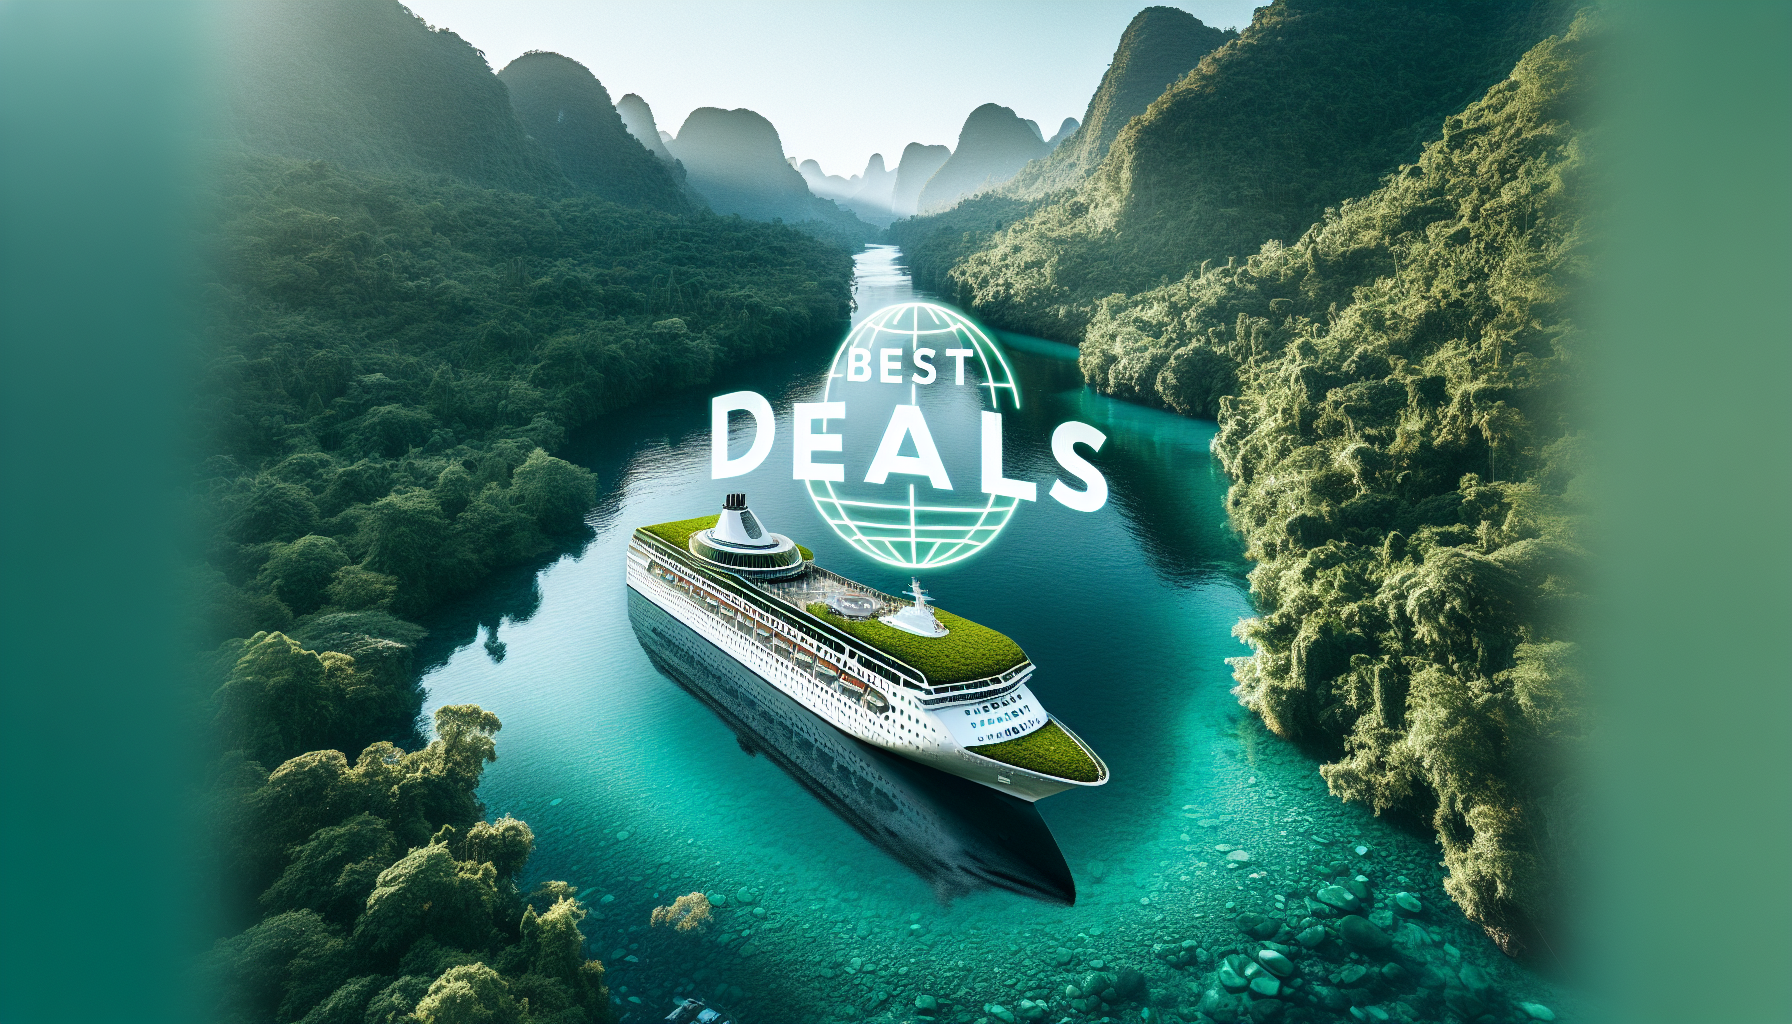 discover the best deals on eco-friendly cruises with green cruises, offering sustainable travel options for your next vacation.